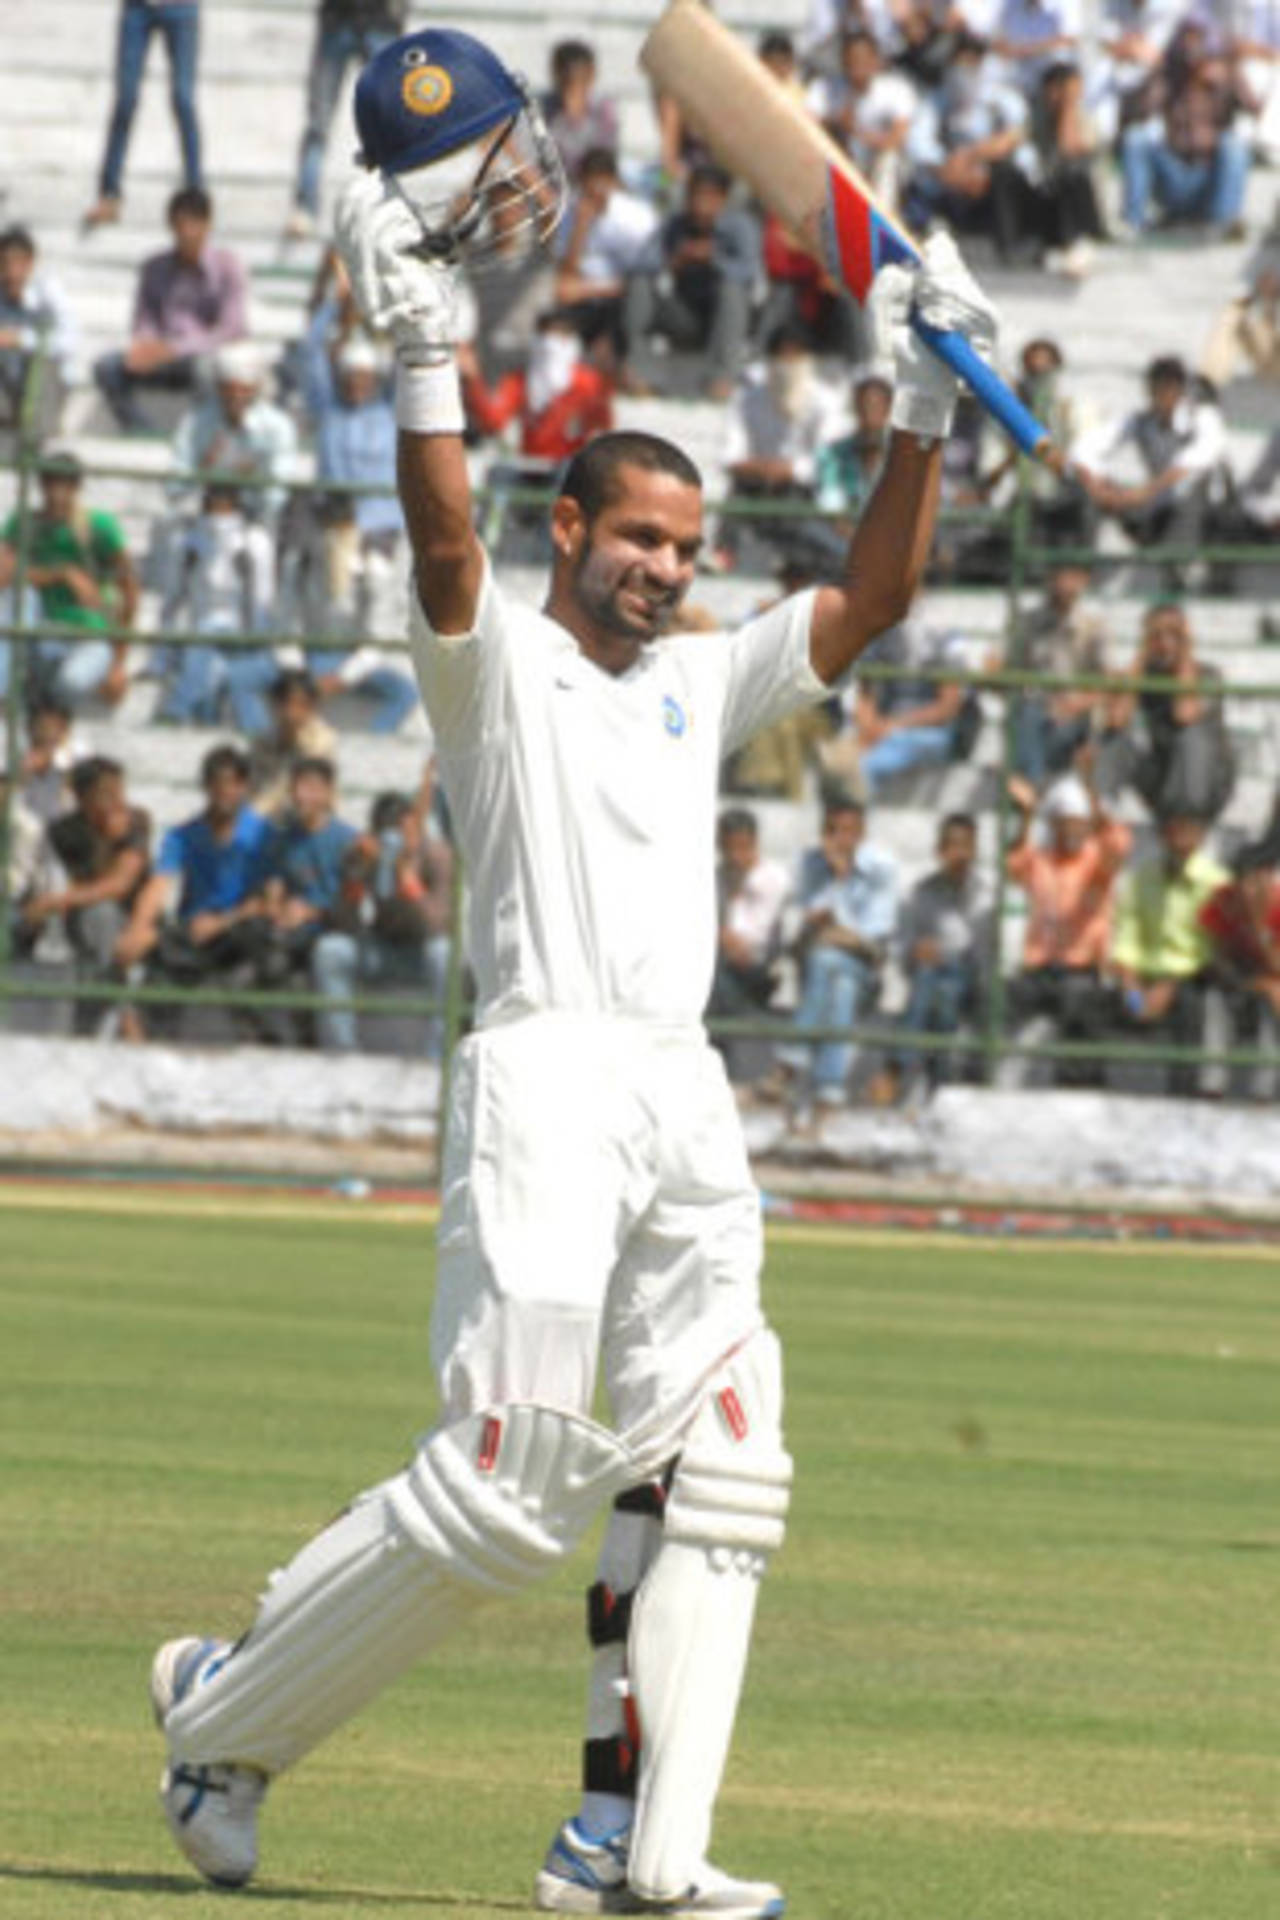 Players such as Shikhar Dhawan, having performed well in the Irani Trophy, have been found wanting in more demanding stages, such as India A's tour of the Caribbean&nbsp;&nbsp;&bull;&nbsp;&nbsp;ESPNcricinfo Ltd